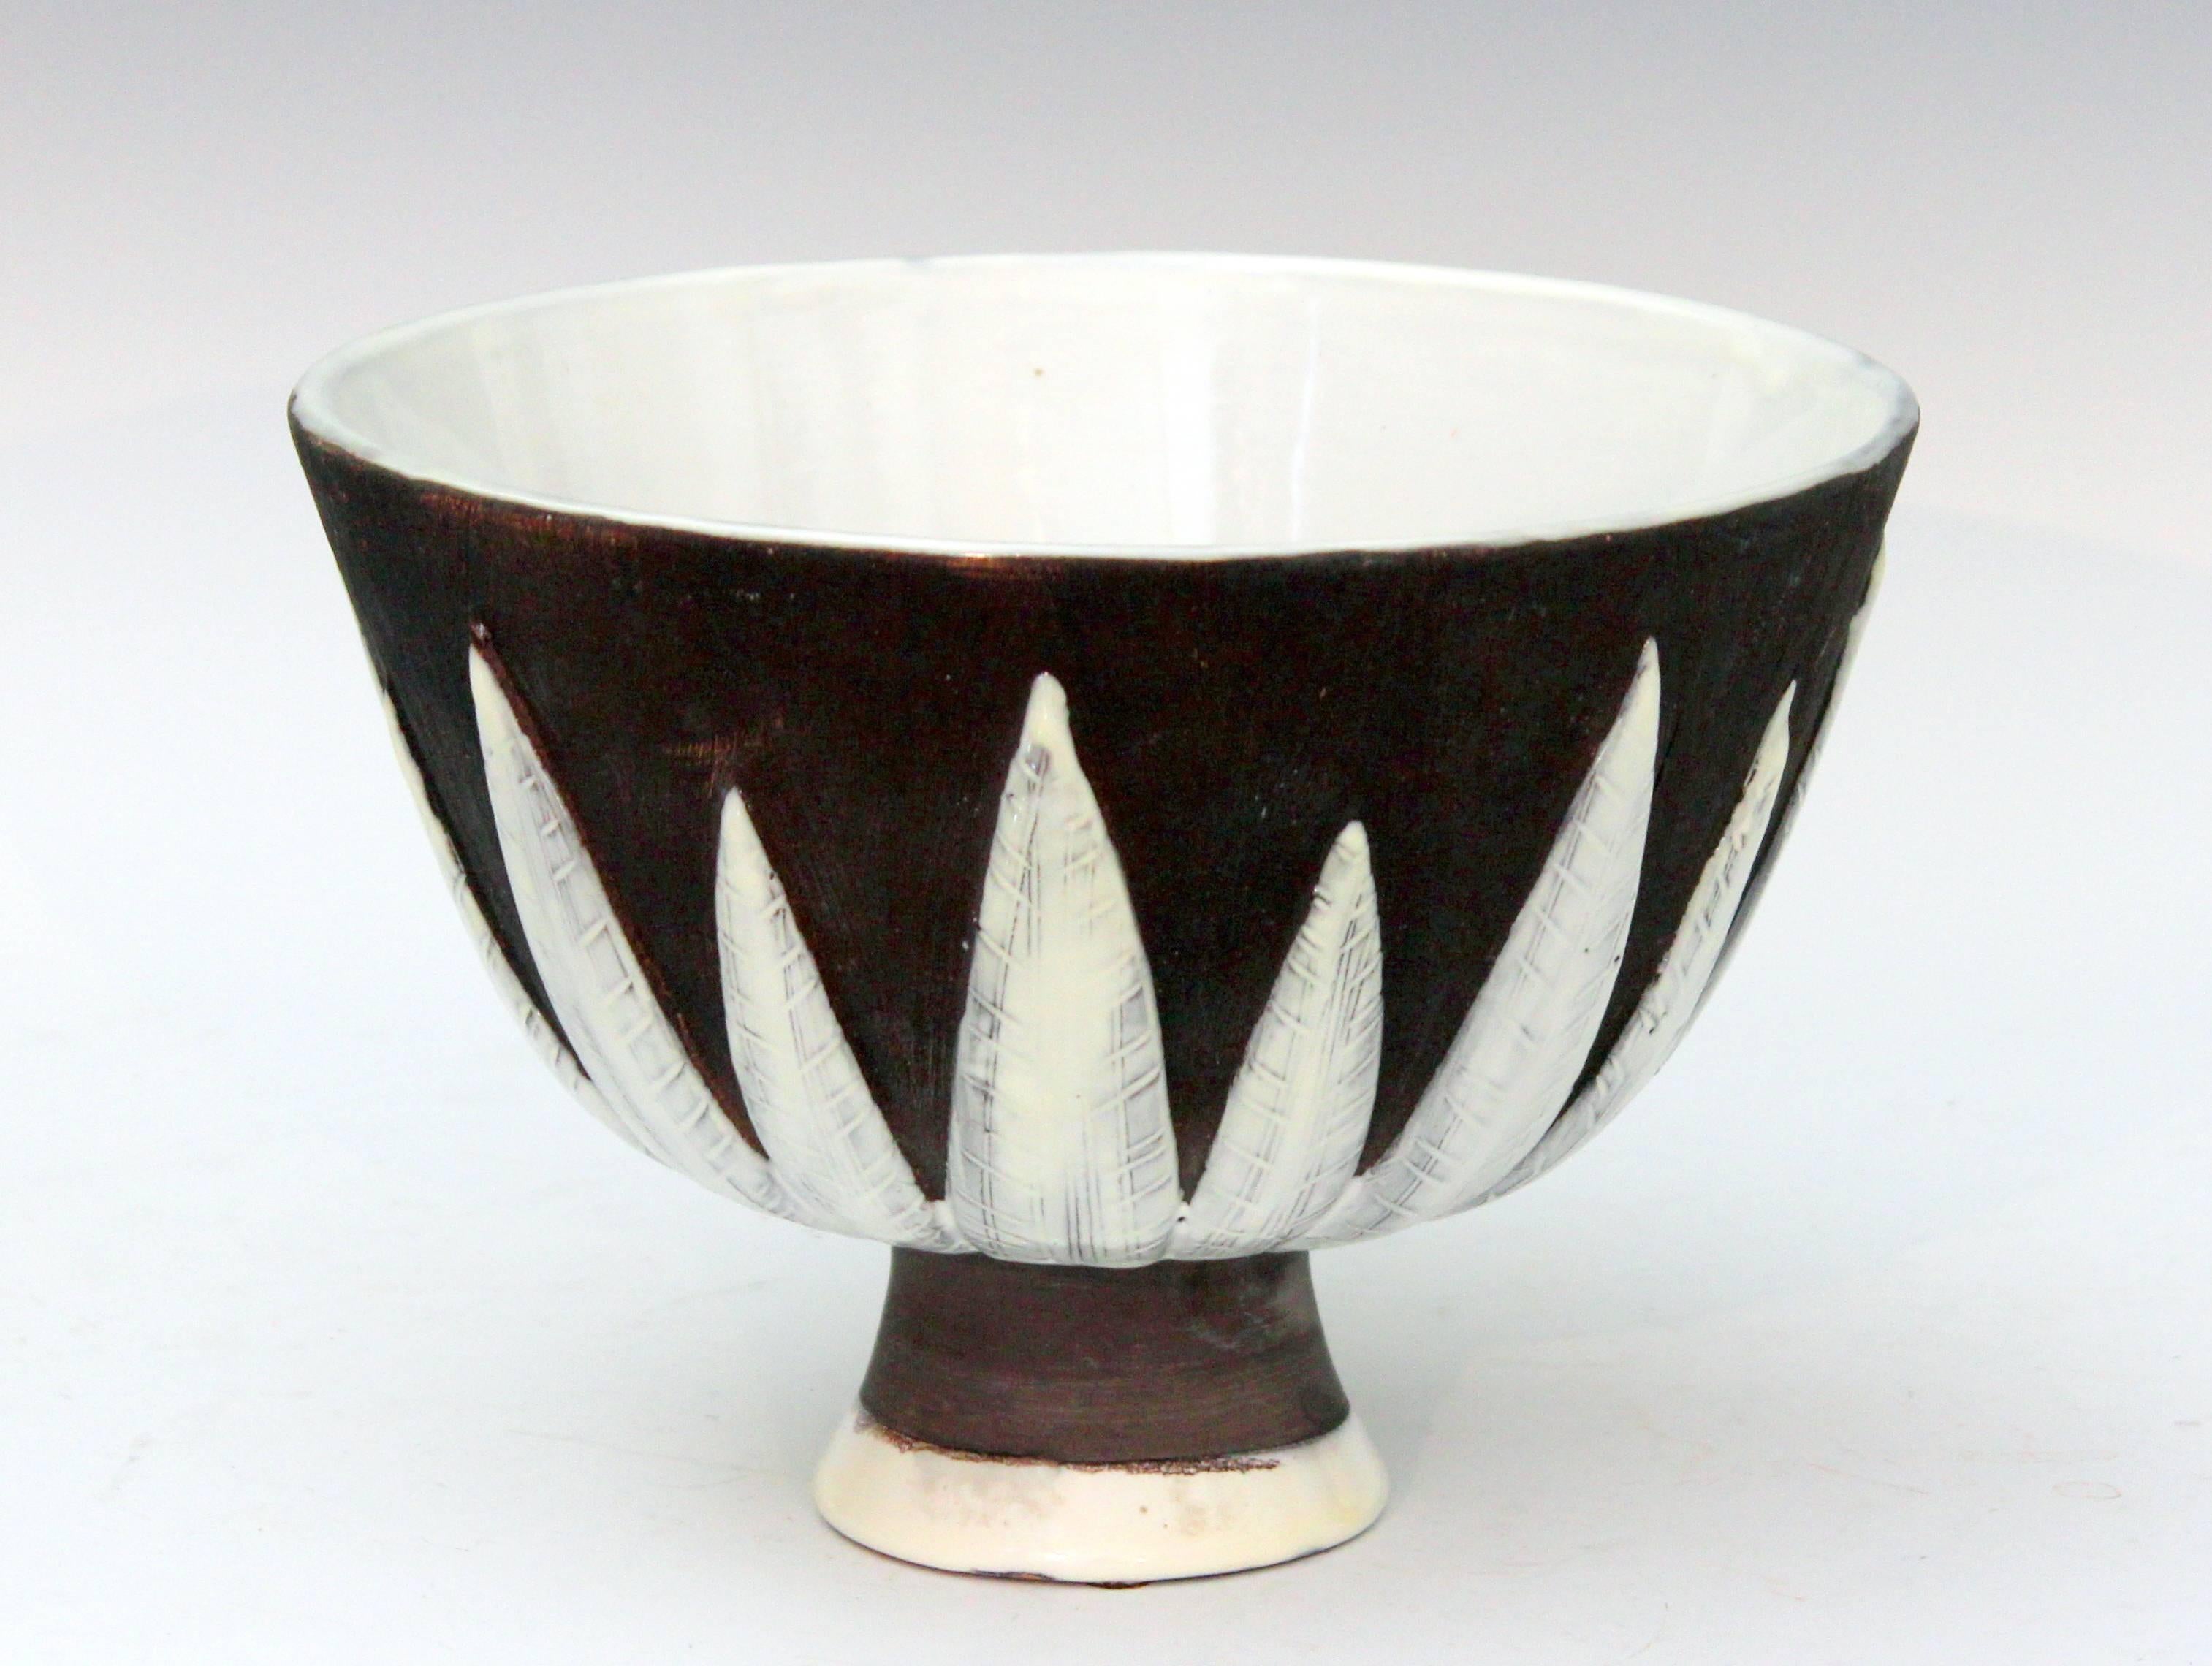 Vintage Bitossi compote with applied plantain leaf design against a warm matte black ground. Classically inspired design with a mid-20th century flair, circa 1950s-1960s. With code for Goodfriend Imports. Measures: 6 1/2